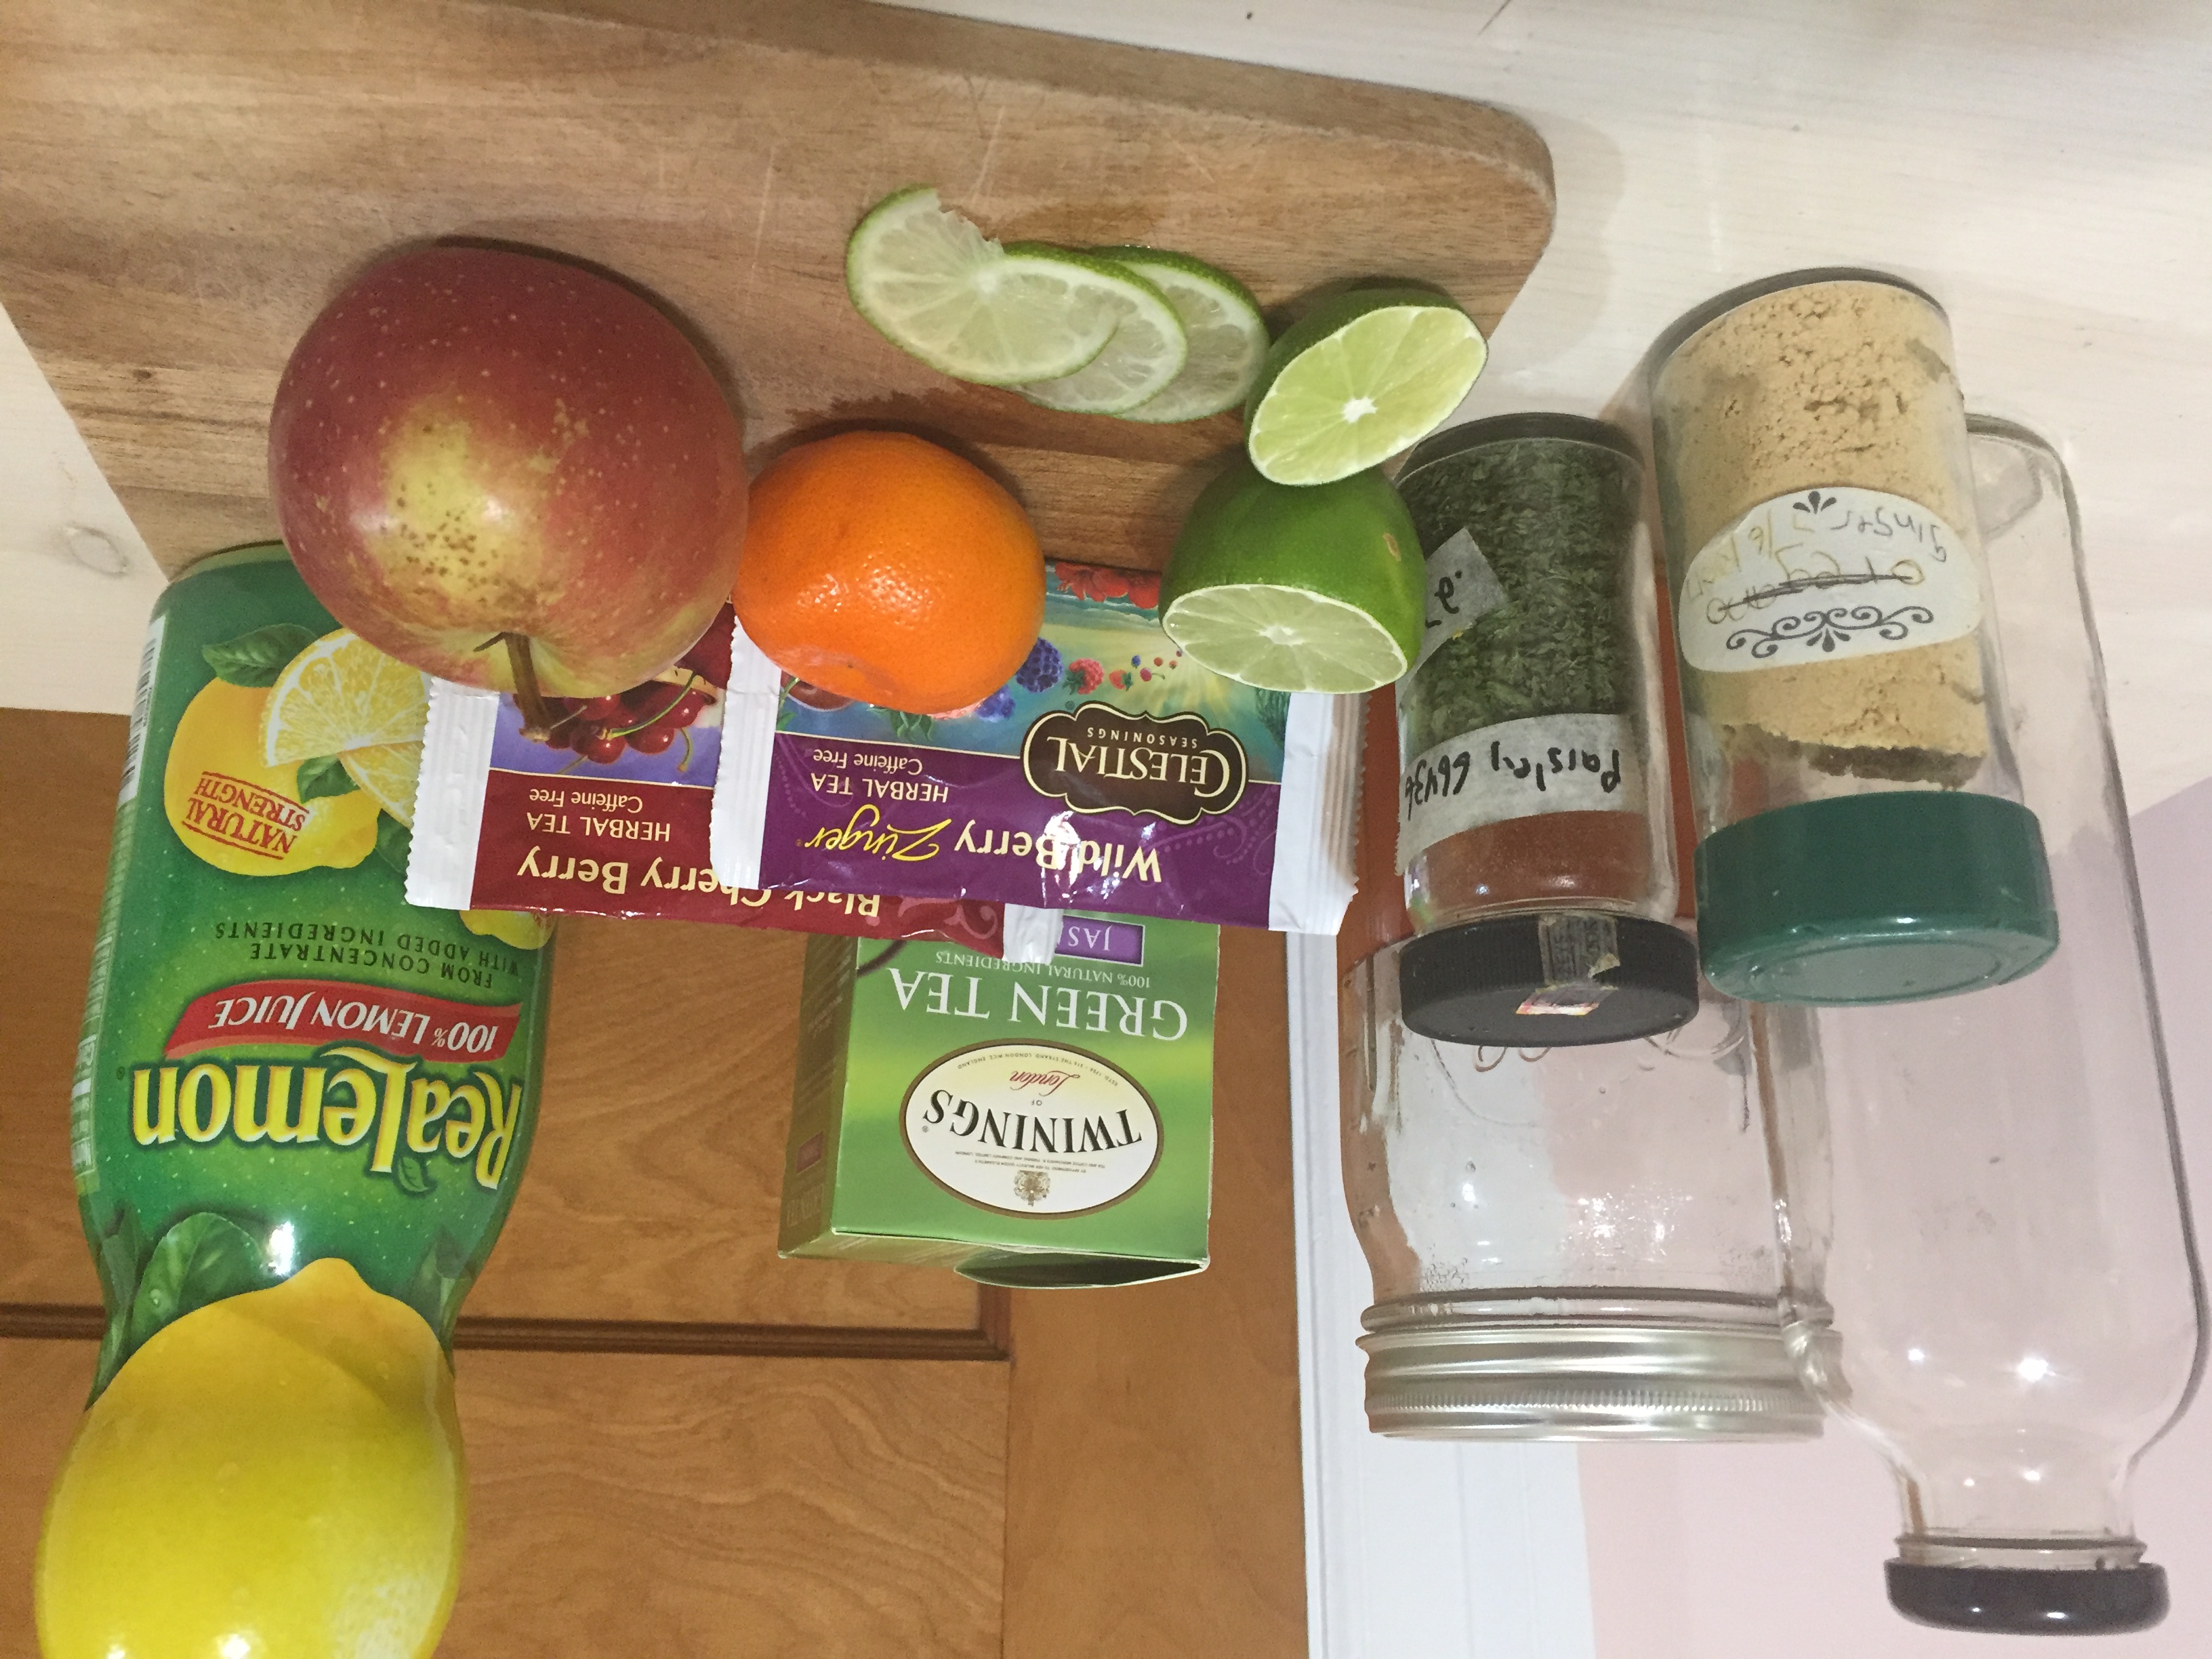 Some of the recommended materials listed above, gathered on a kitchen counter. In the back we see a glass bottle and jar with lids, various packs of tea bags, and a bottle of lemon juice. In the front there are a couple jars of spices and a cuttingboard holding an orange, and apple, and a partially sliced lime.